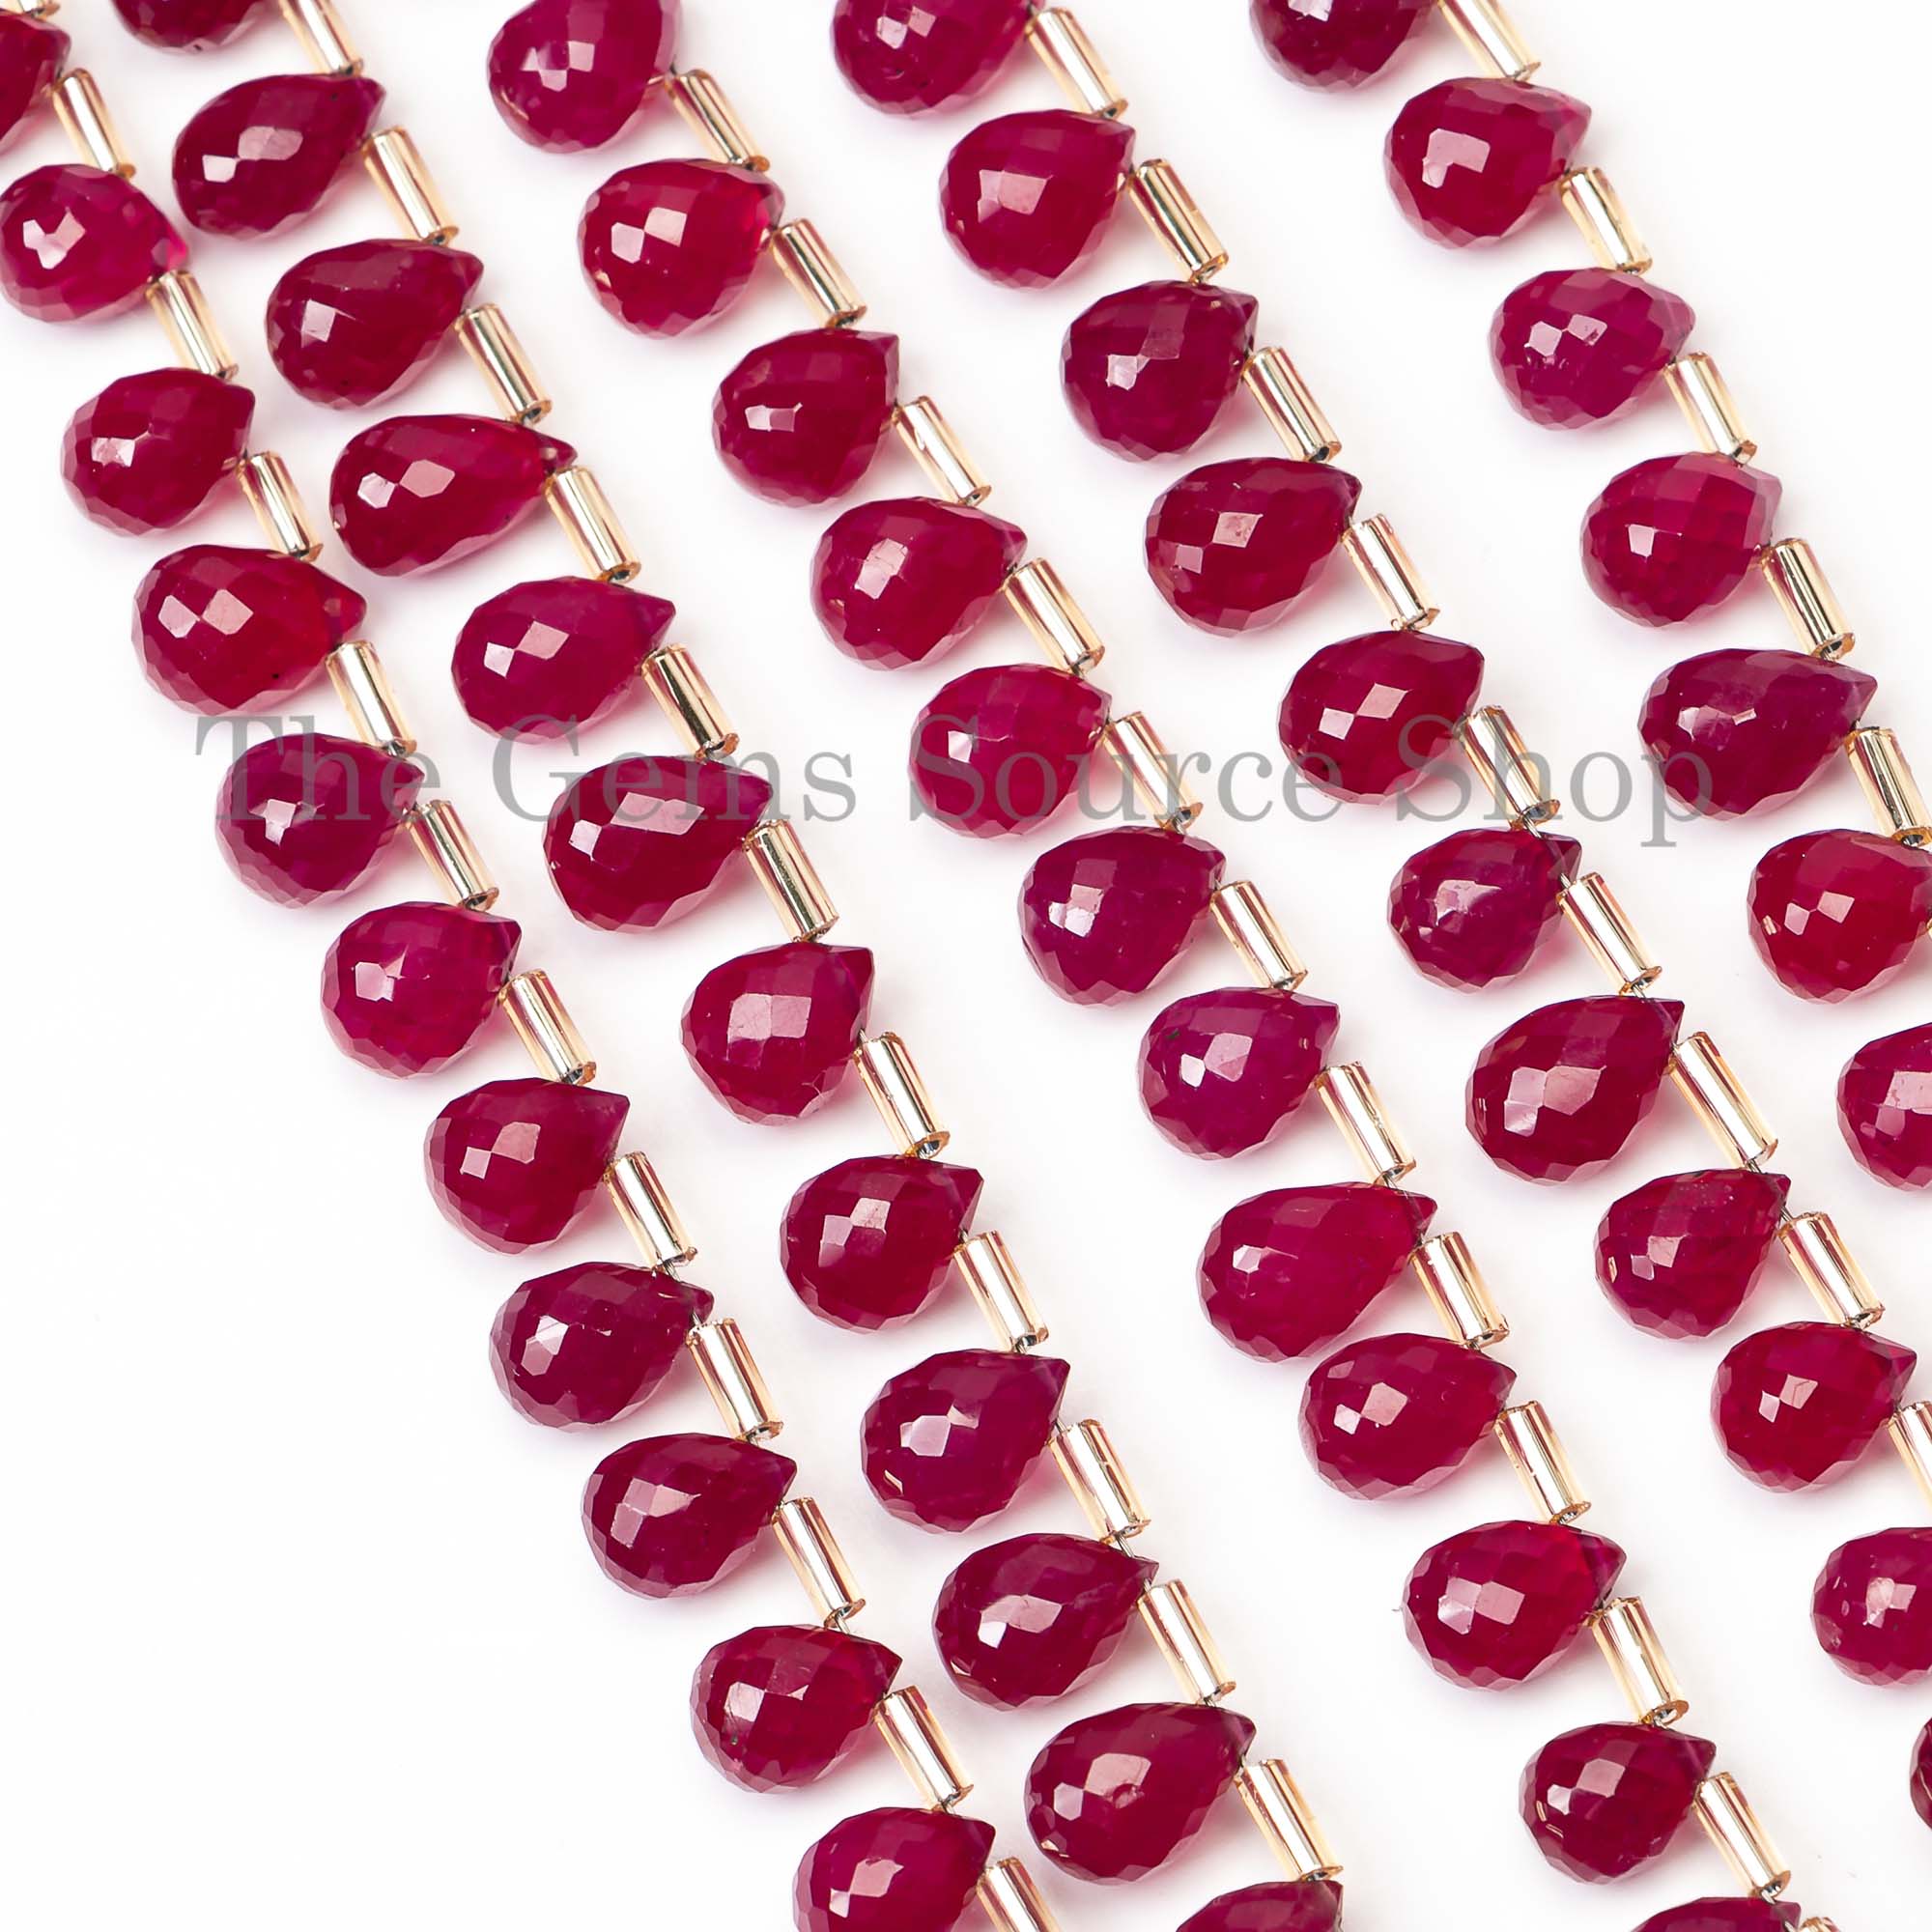 Ruby Faceted Beads, Ruby Drop Shape Beads, Faceted Drop Beads, Ruby Gemstone Beads